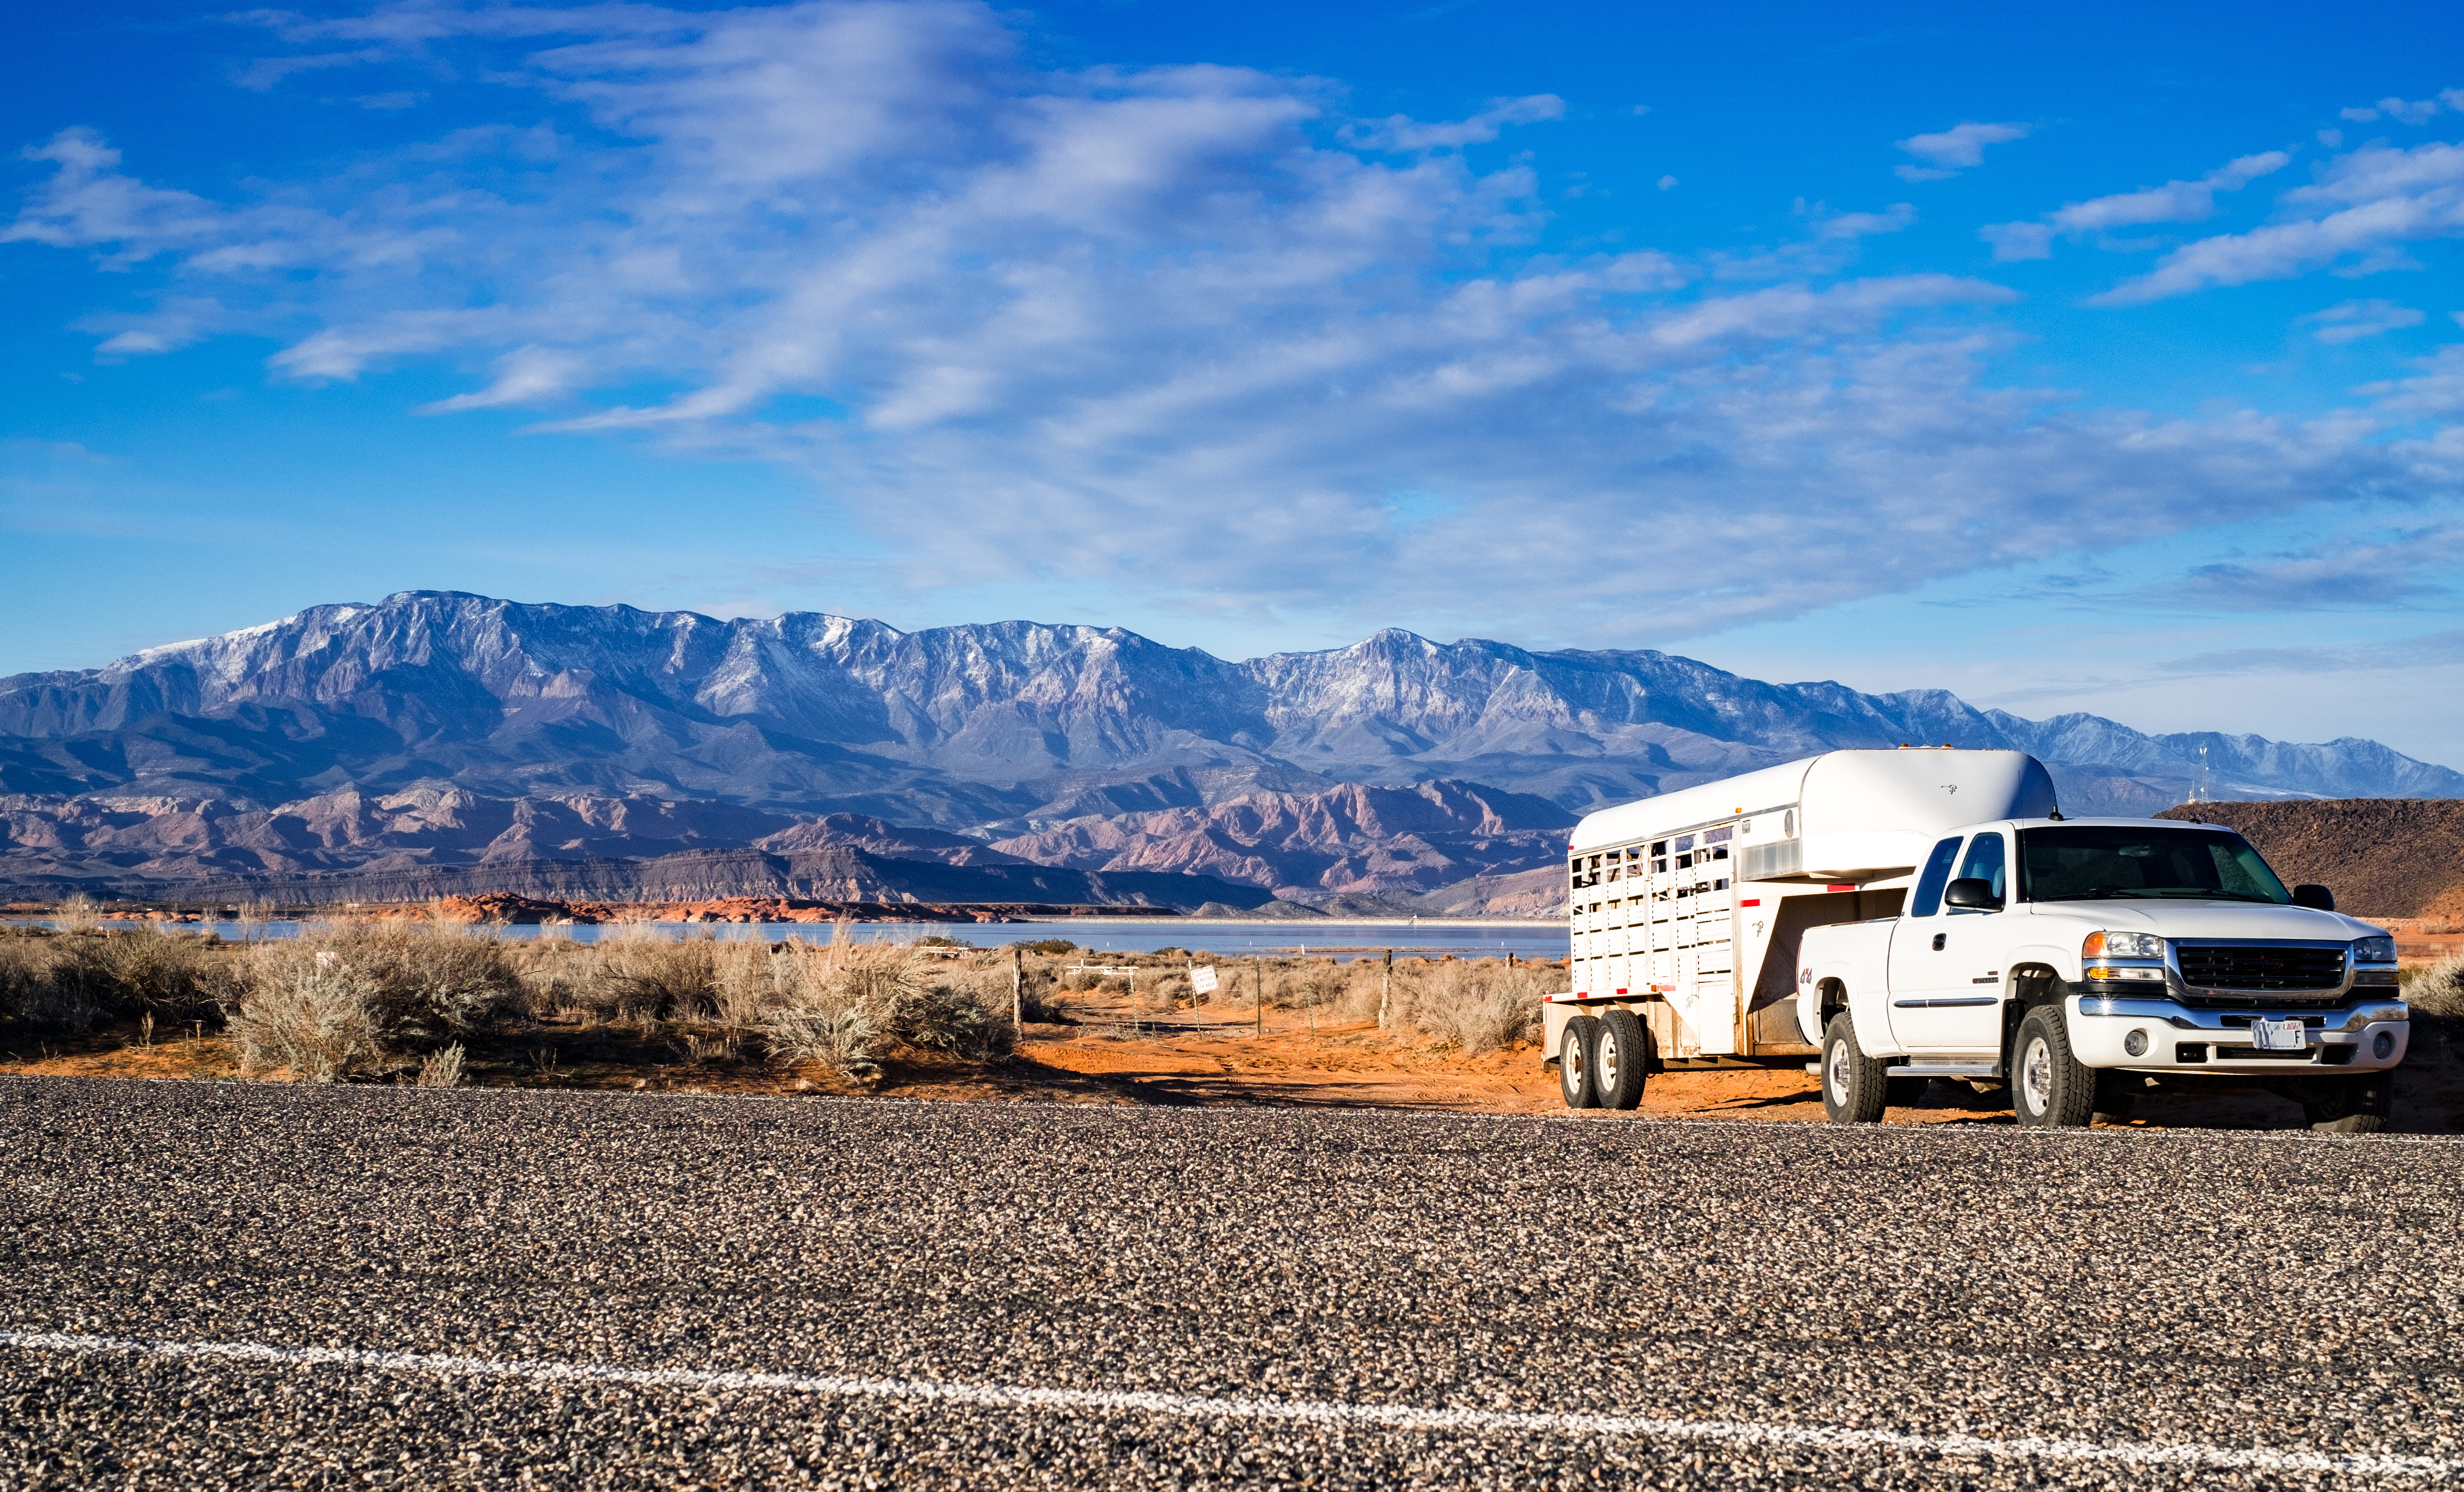 A horse trailer parked by the side of the road, with mountains in the background. 